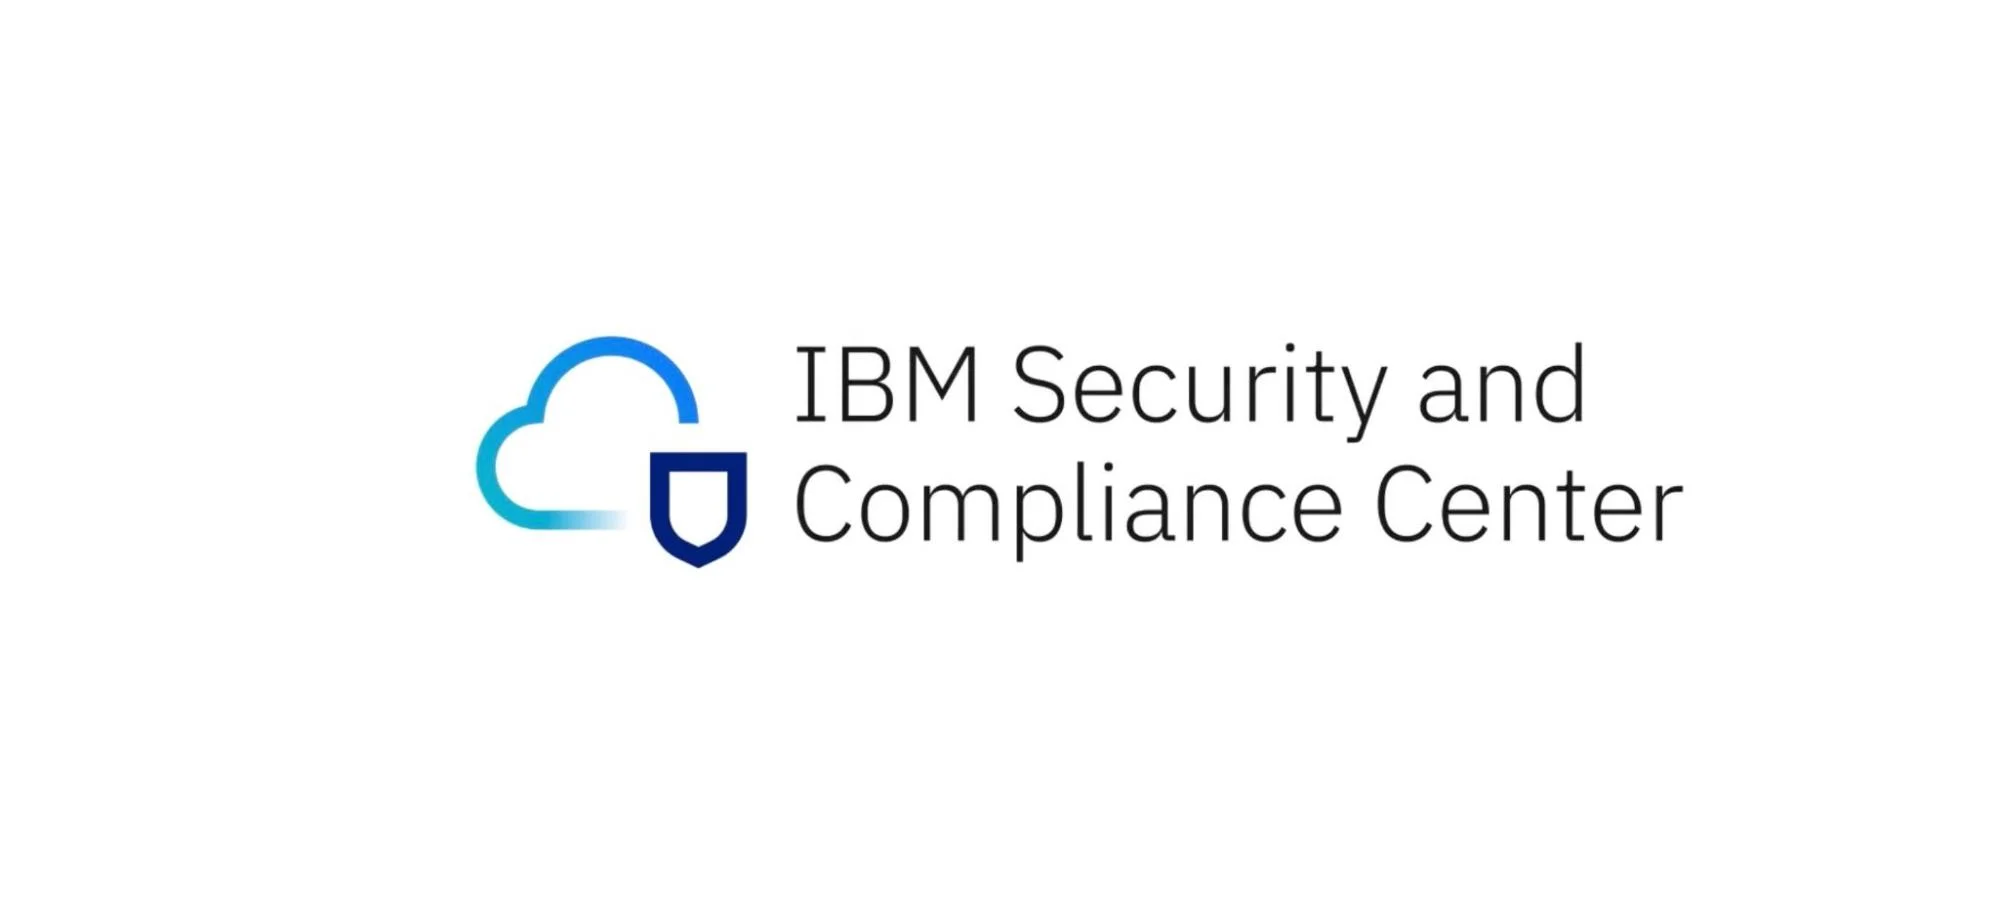 IBM Security and Compliance Center